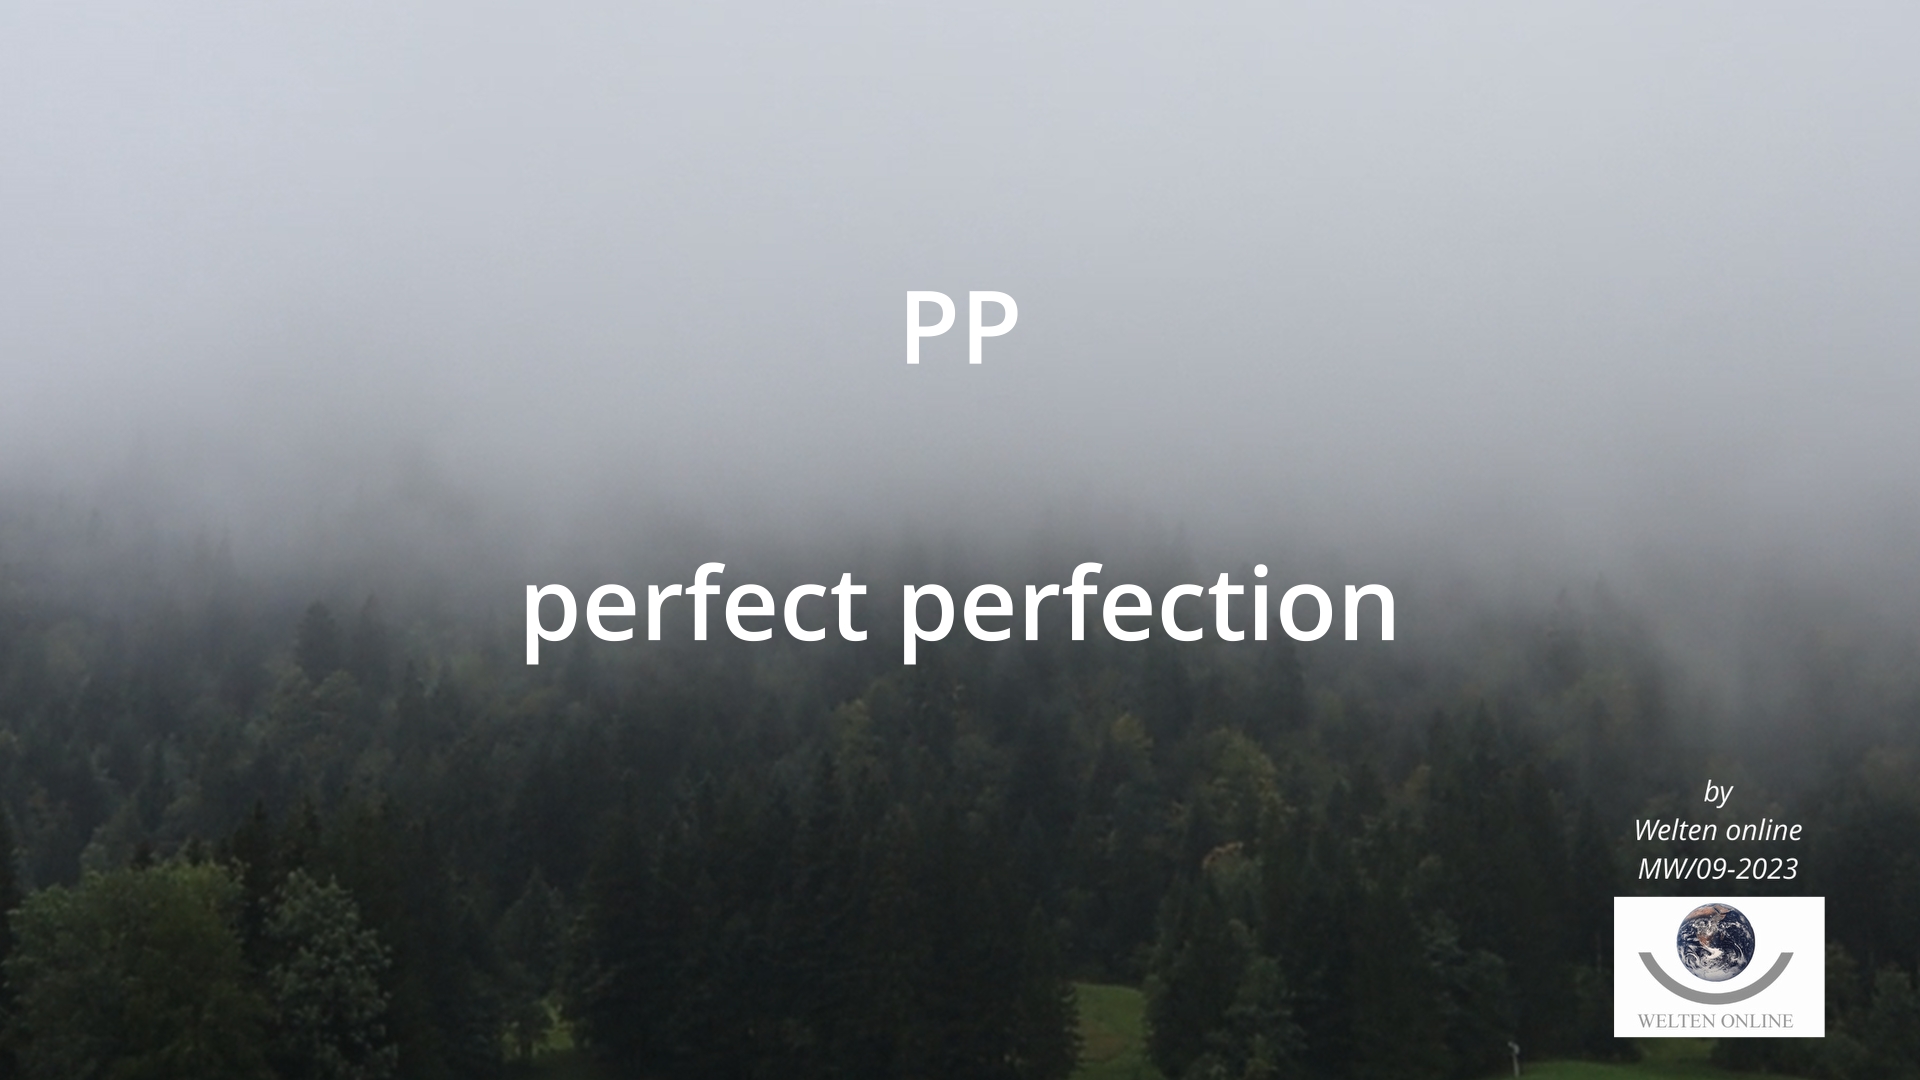 PP perfect perfection